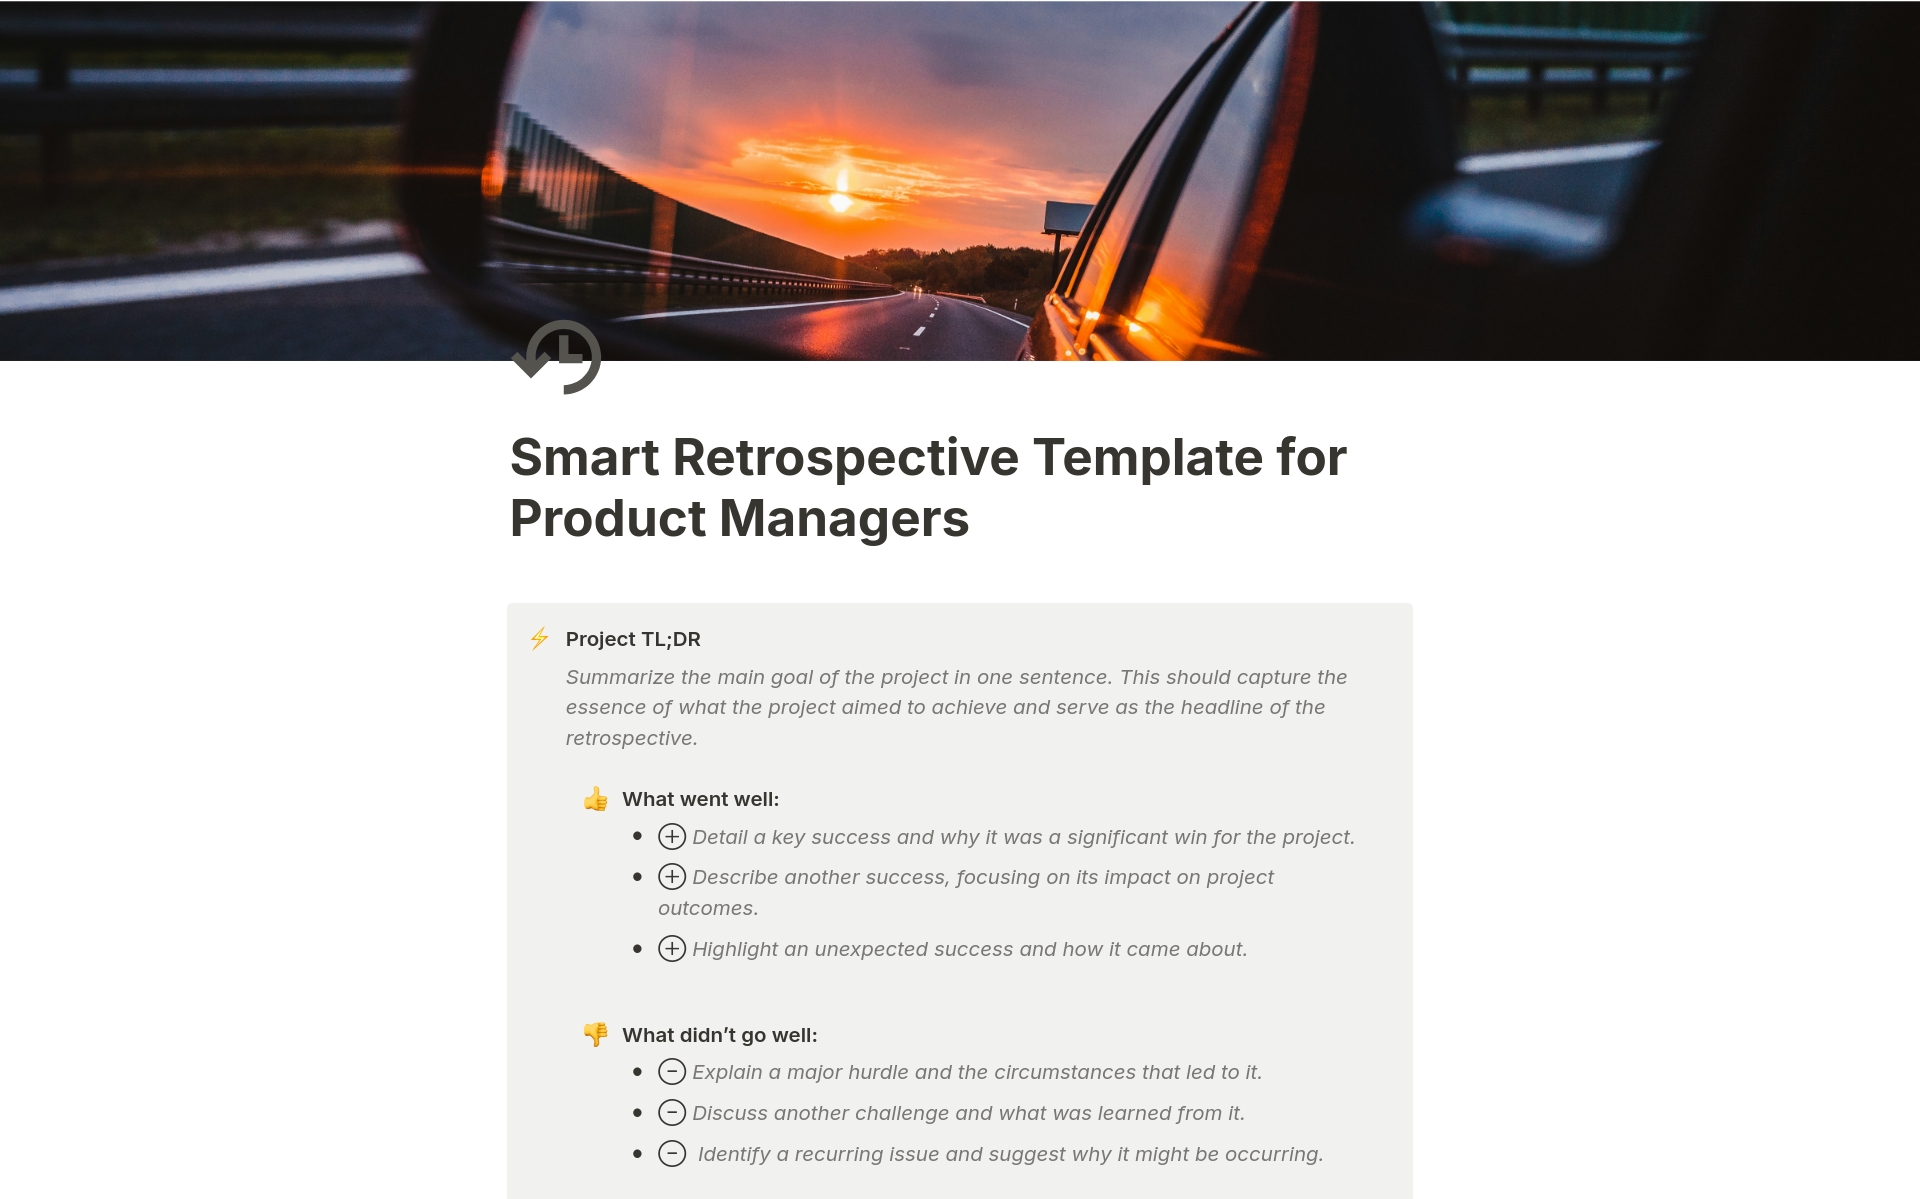 A template preview for Smart Retrospective Framework for Product Managers